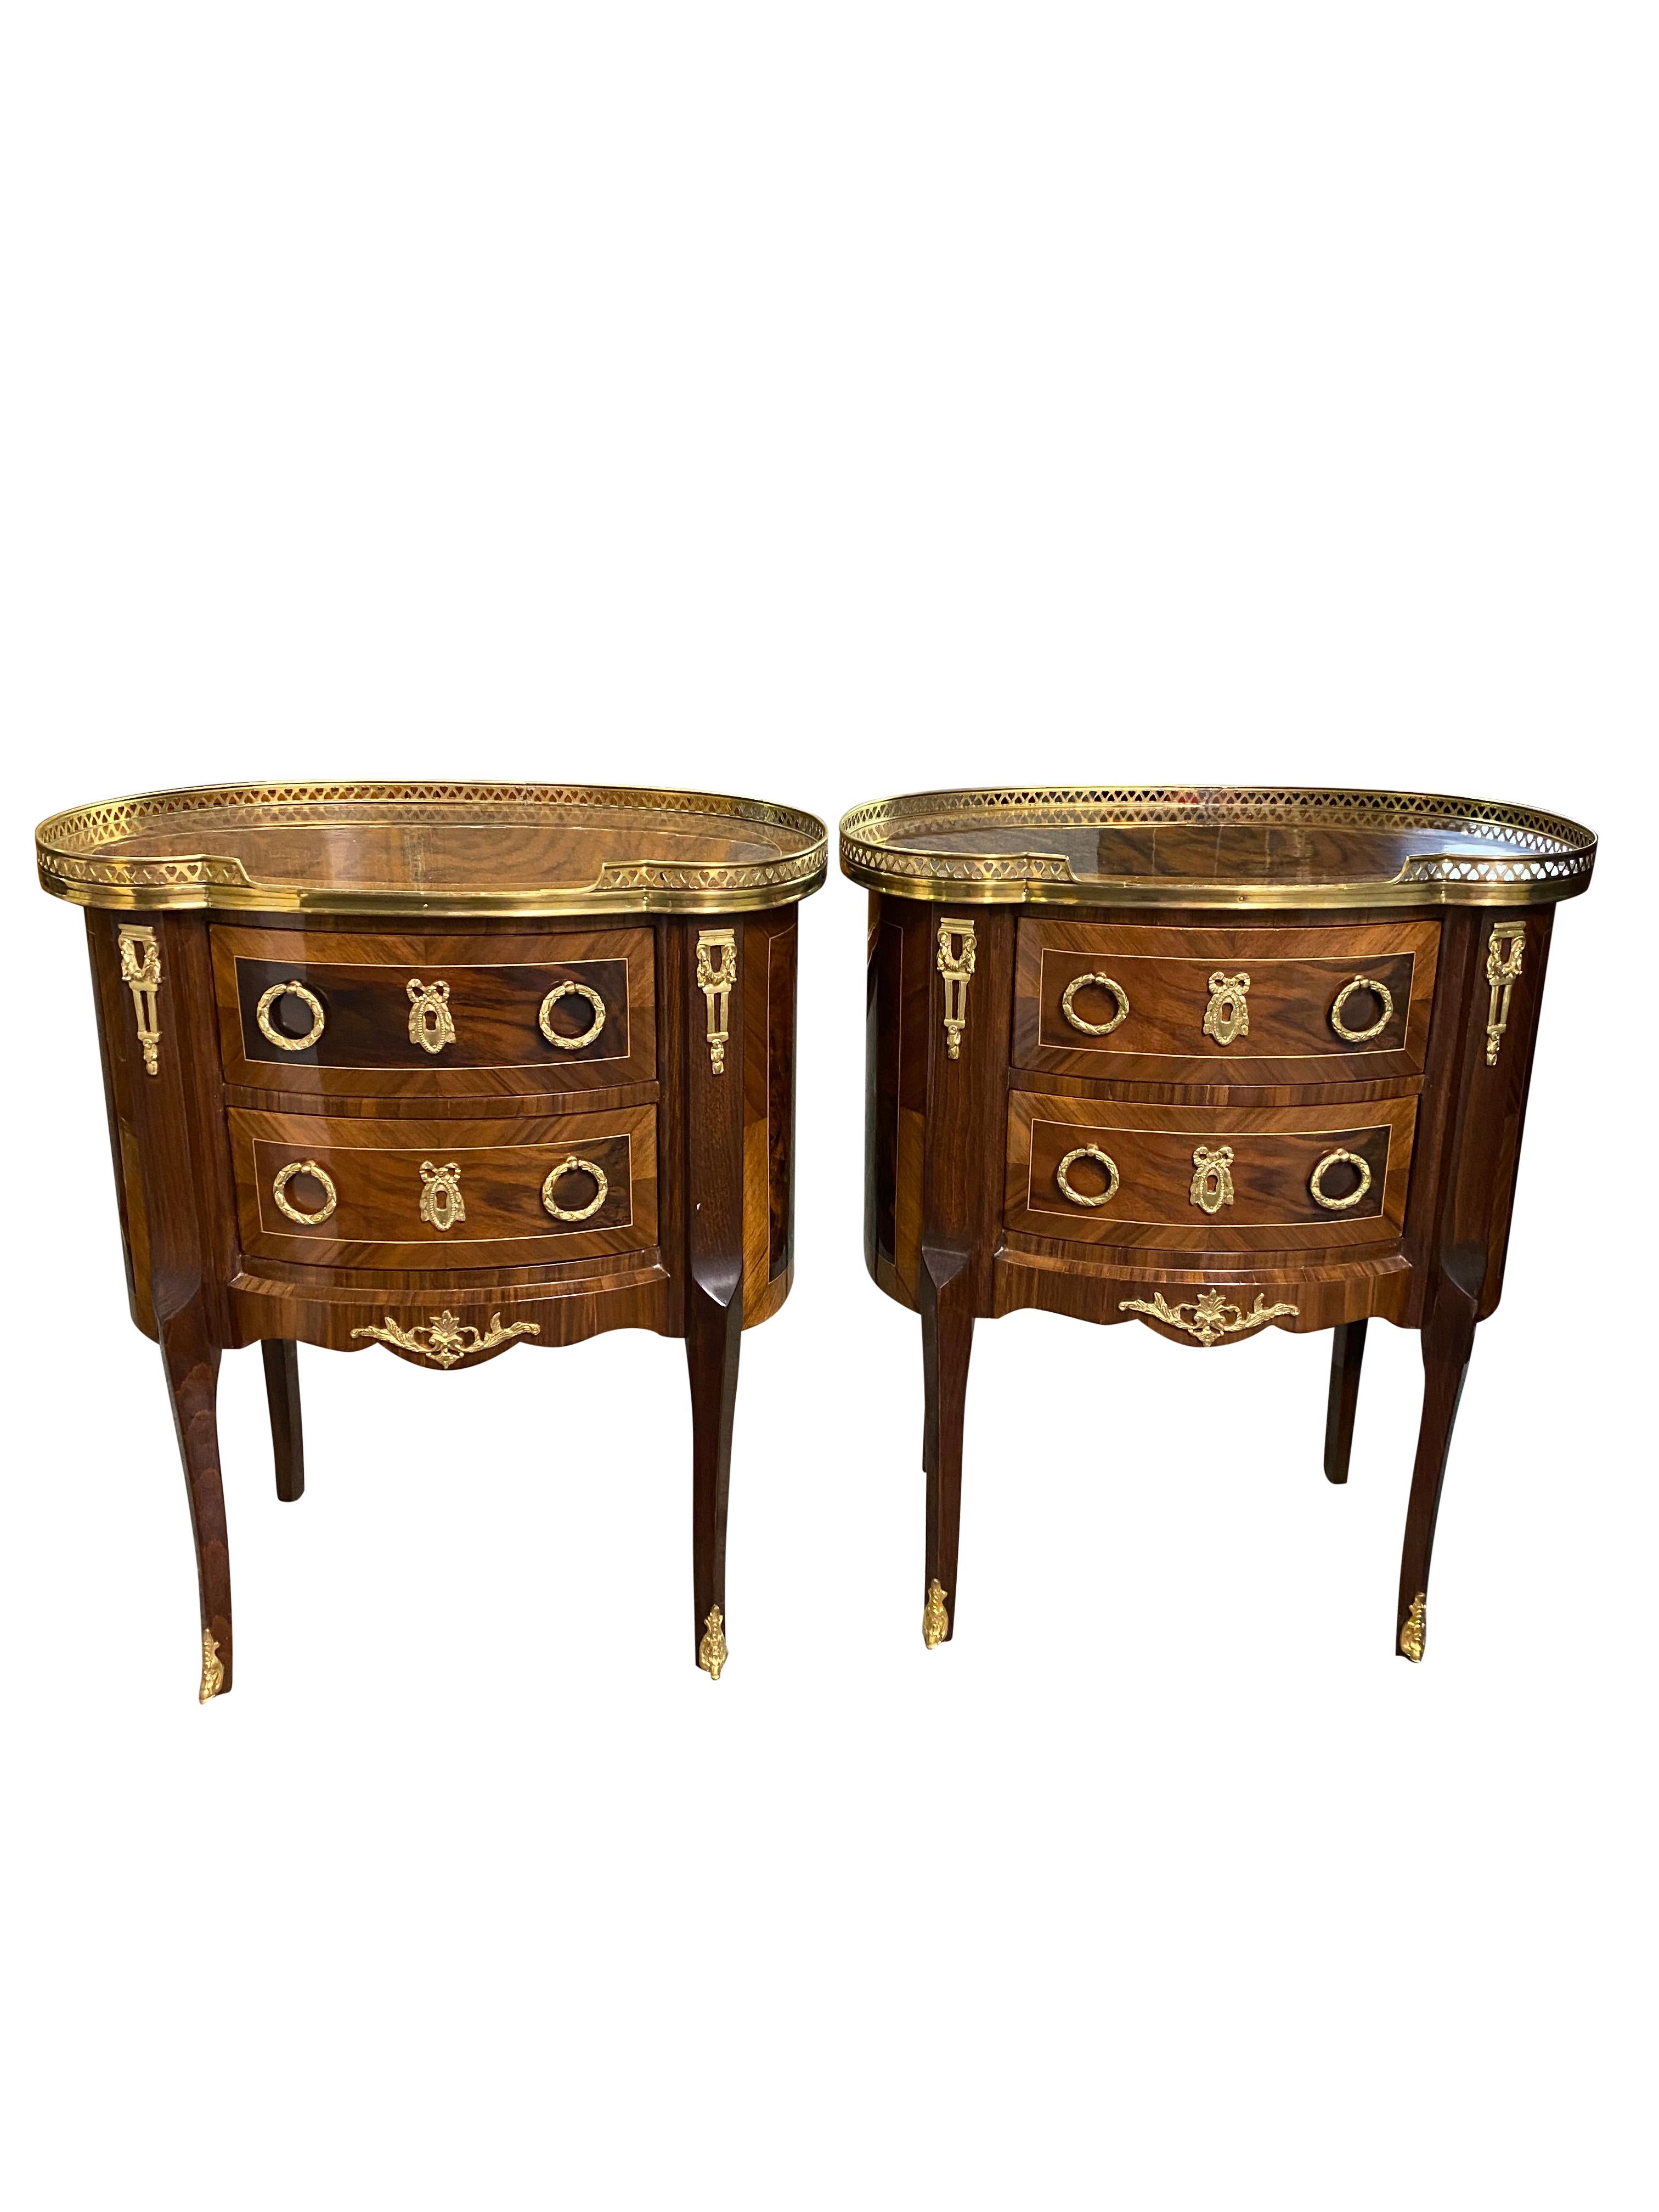 A stunning pair of 20th century English Regency style side tables. A gorgeous and elegant design perfect for modern interiors.